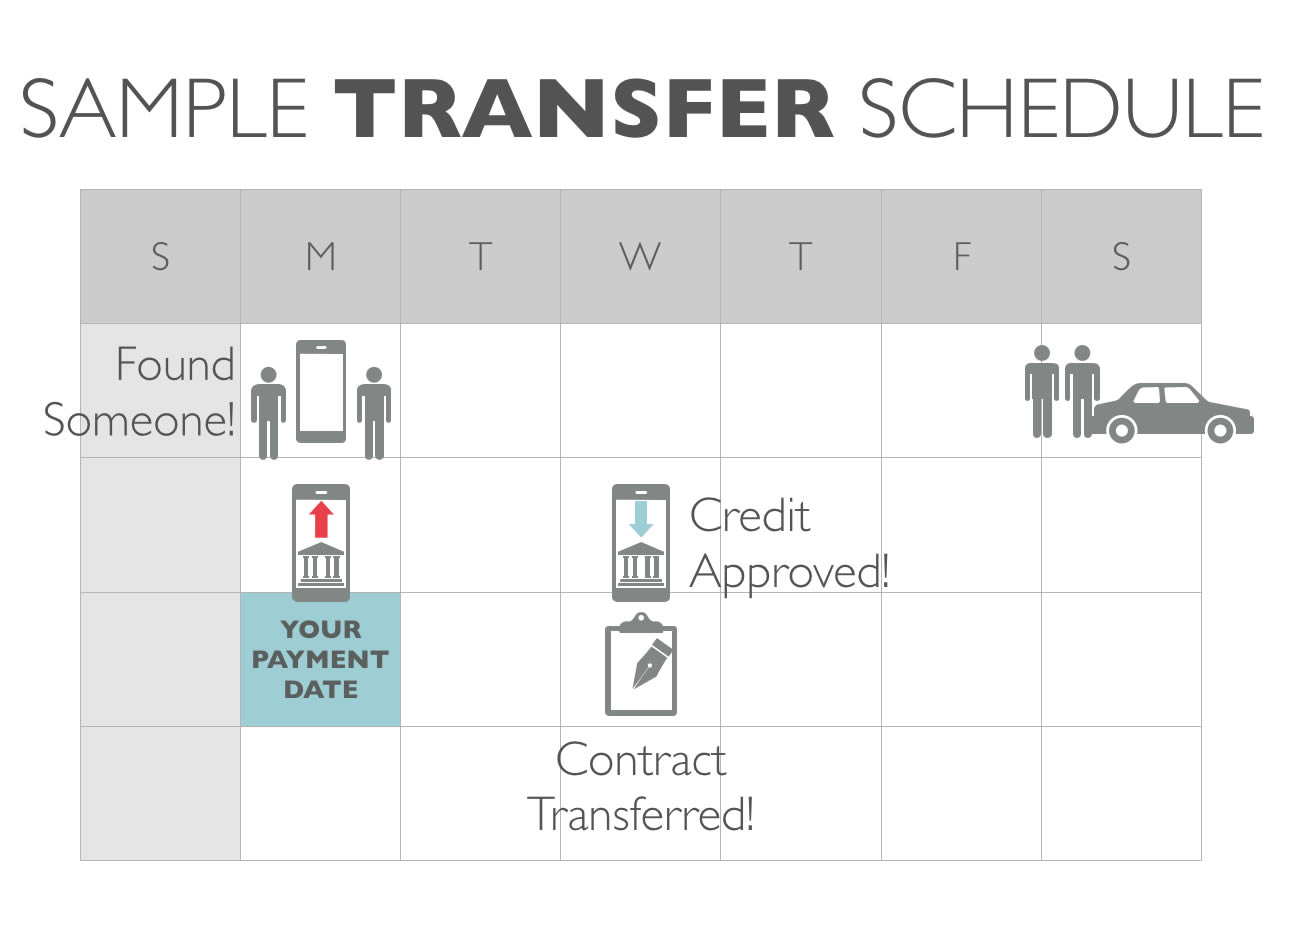 Lease Takeover: Transfer Before the Next Payment - Step 2